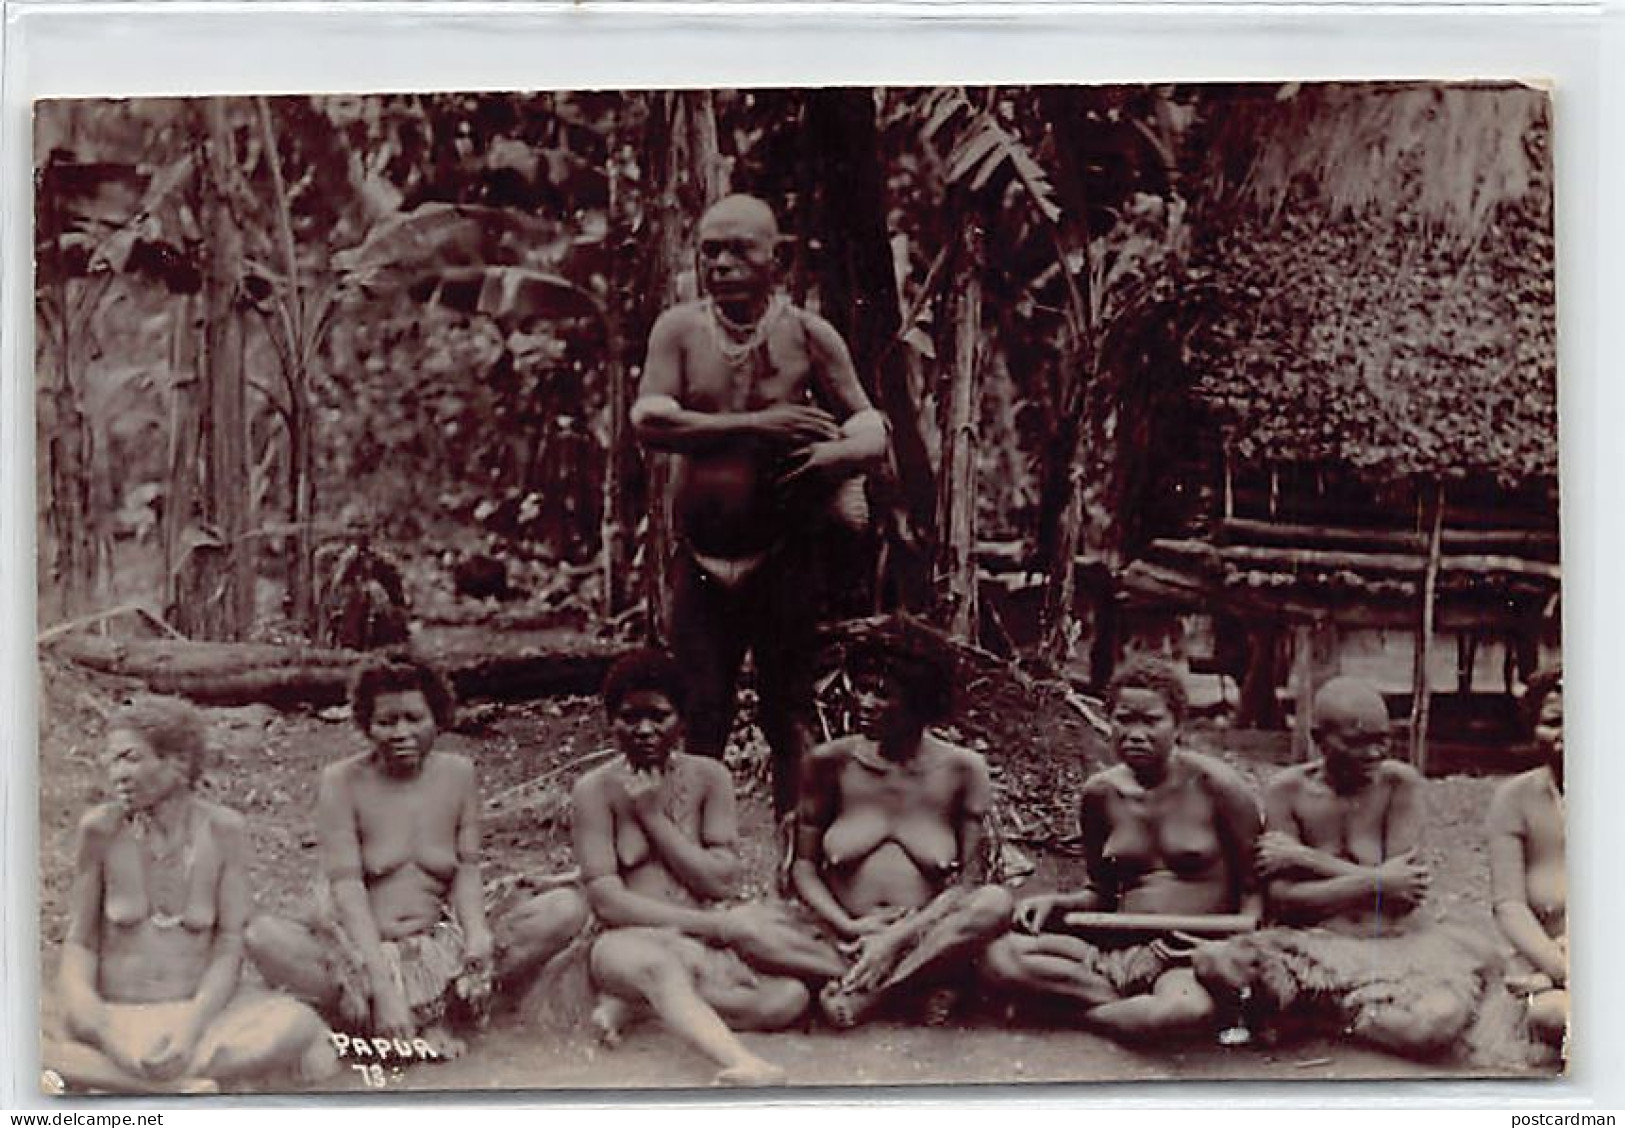 PAPUA NEW GUINEA - Papuan Chief And His Nude Wives - REAL PHOTO - Publ. W. H. Cooper. - Papua Nuova Guinea